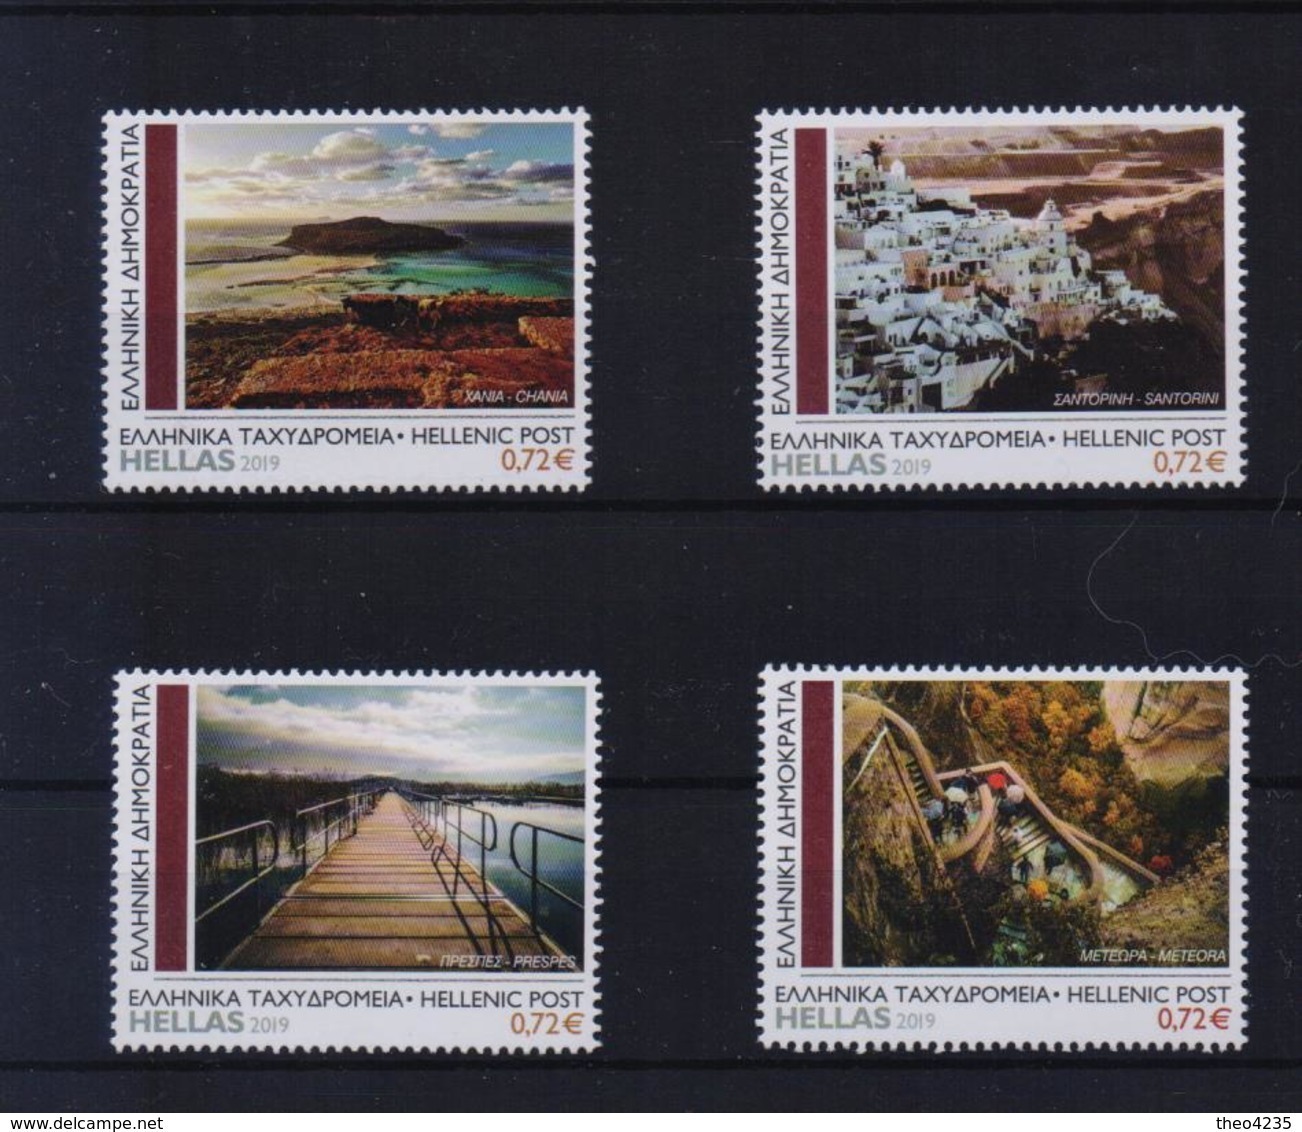 GREECE STAMPS 2019 /INTERNATIONAL EXHIBITION MILANOFIL 2019(without Folder)-MNH-COMPLETE SET - Nuevos